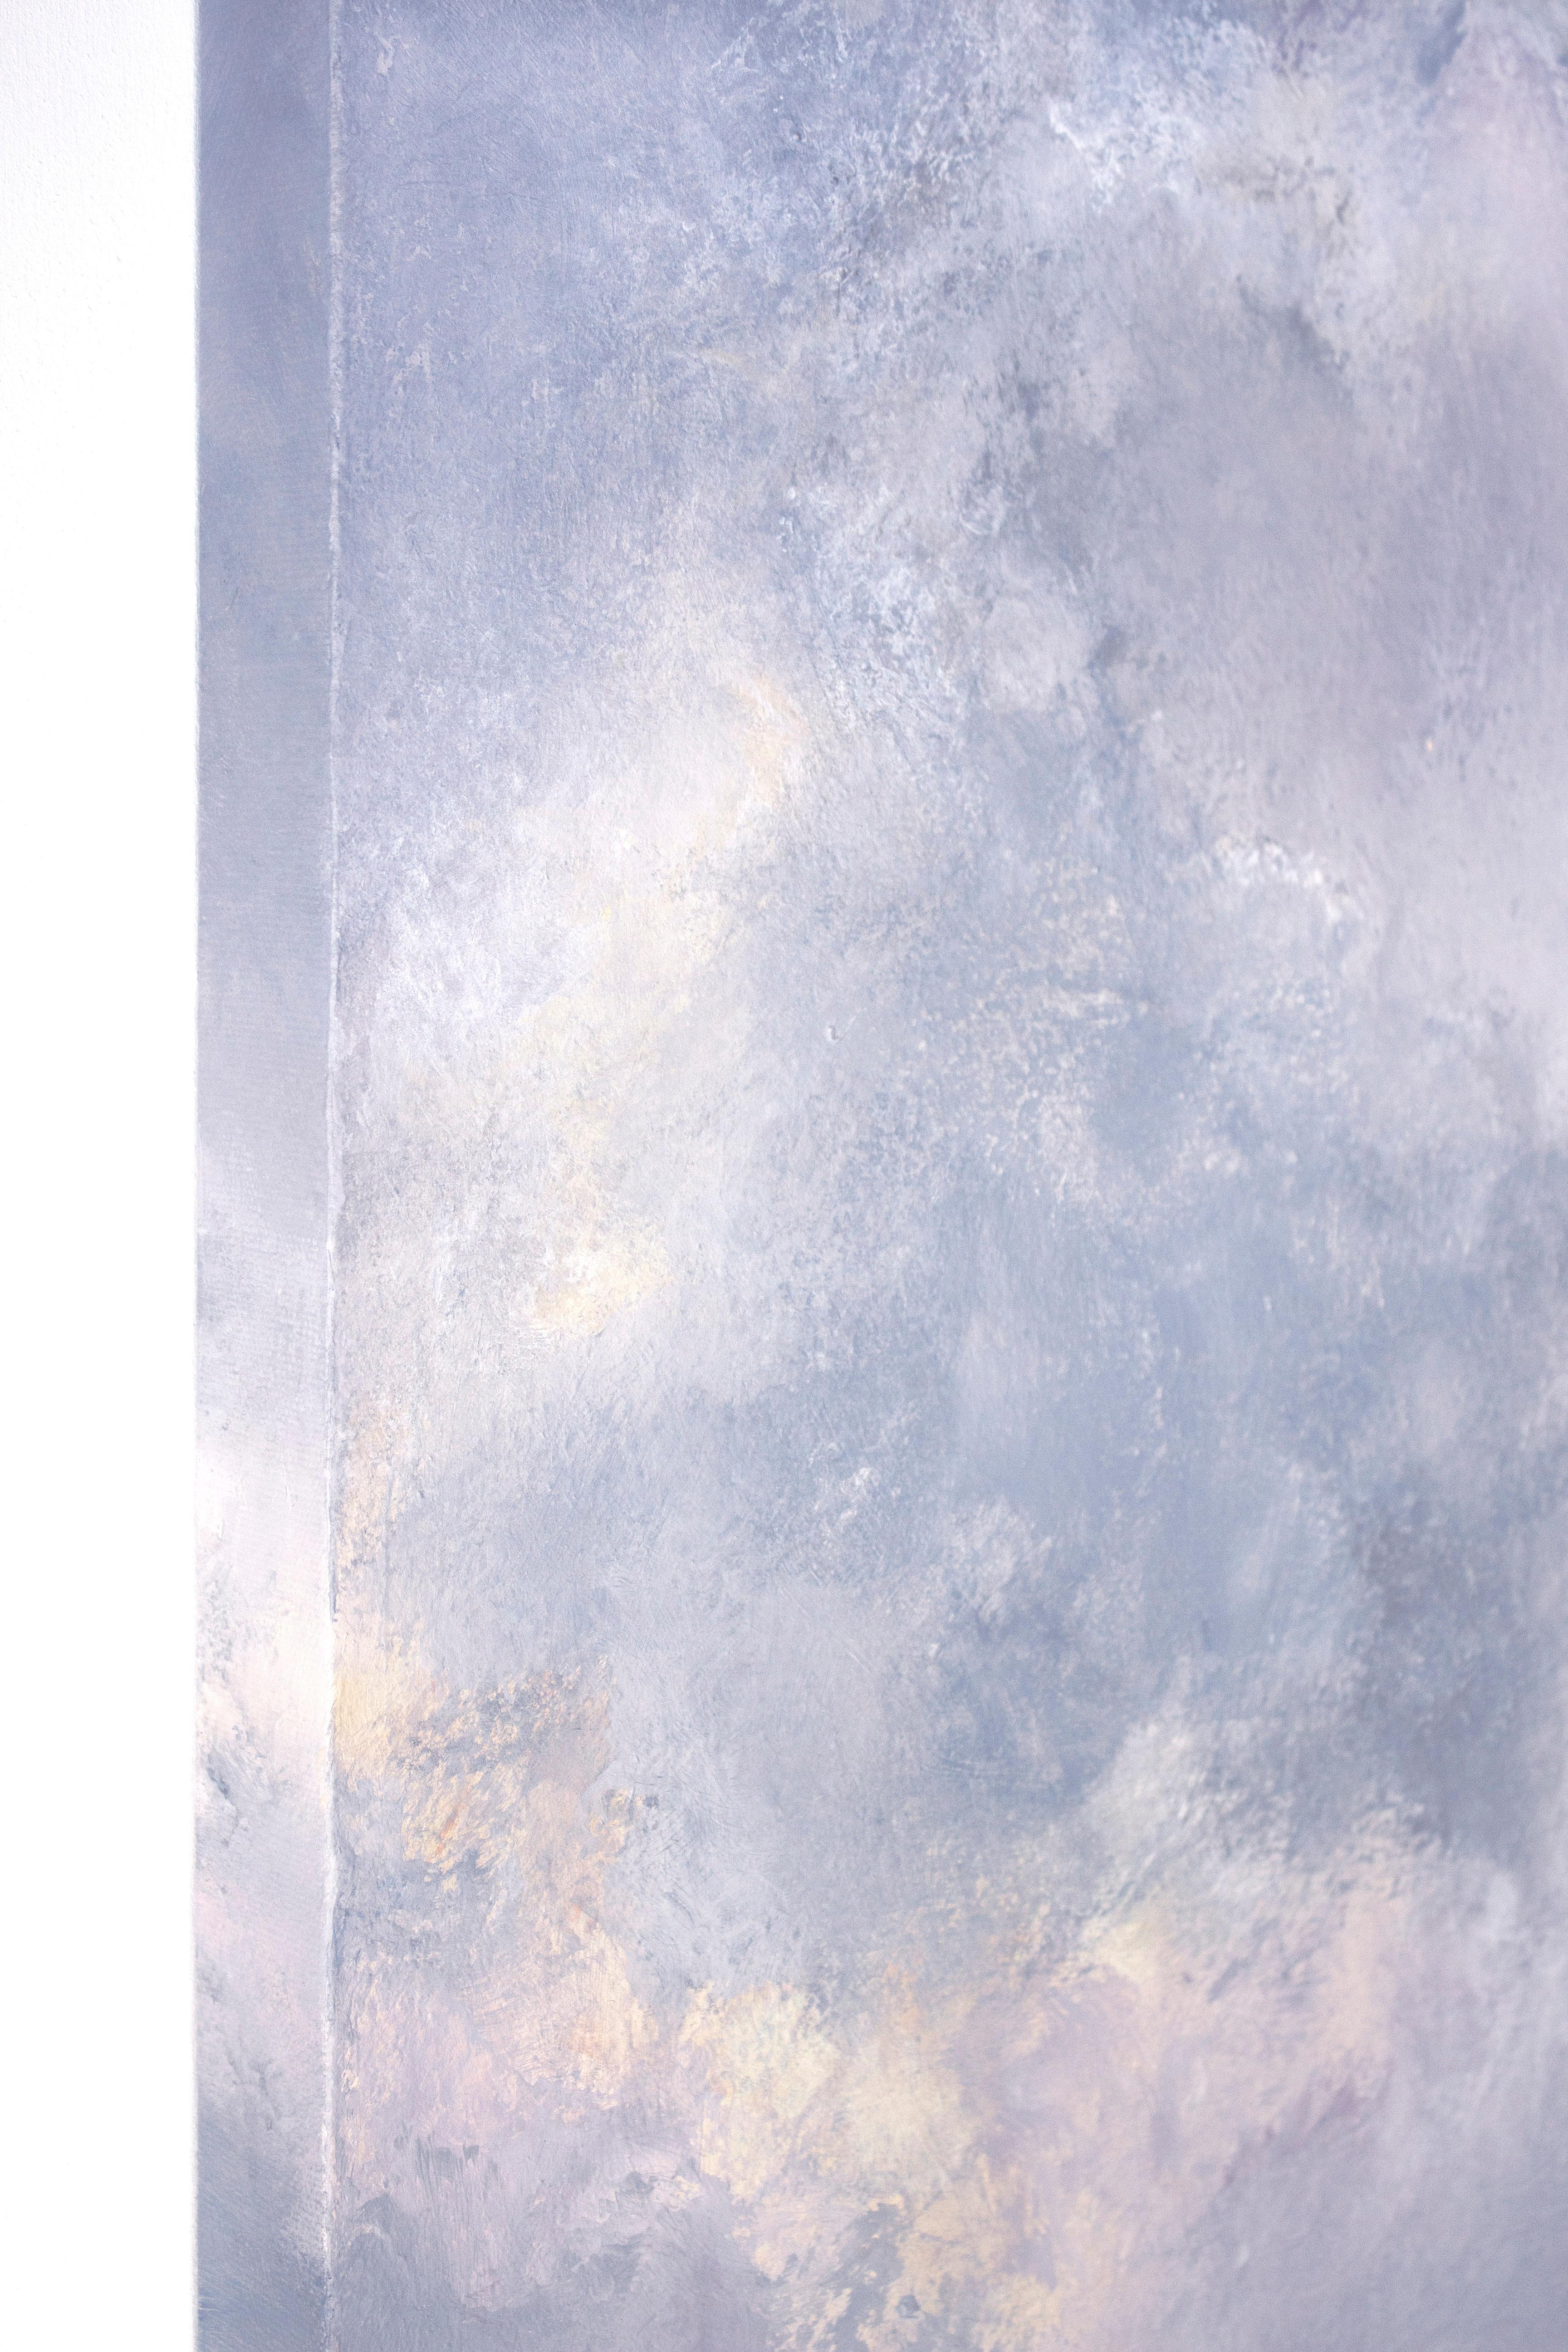 <p>Artist Comments<br>Artist Karen Hansen displays a soothing abstract capturing the moment the sun radiates glorious hues in the sky. A fanciful representation of her endless fascination with clouds. She paints dreamy lilacs in a colorful display